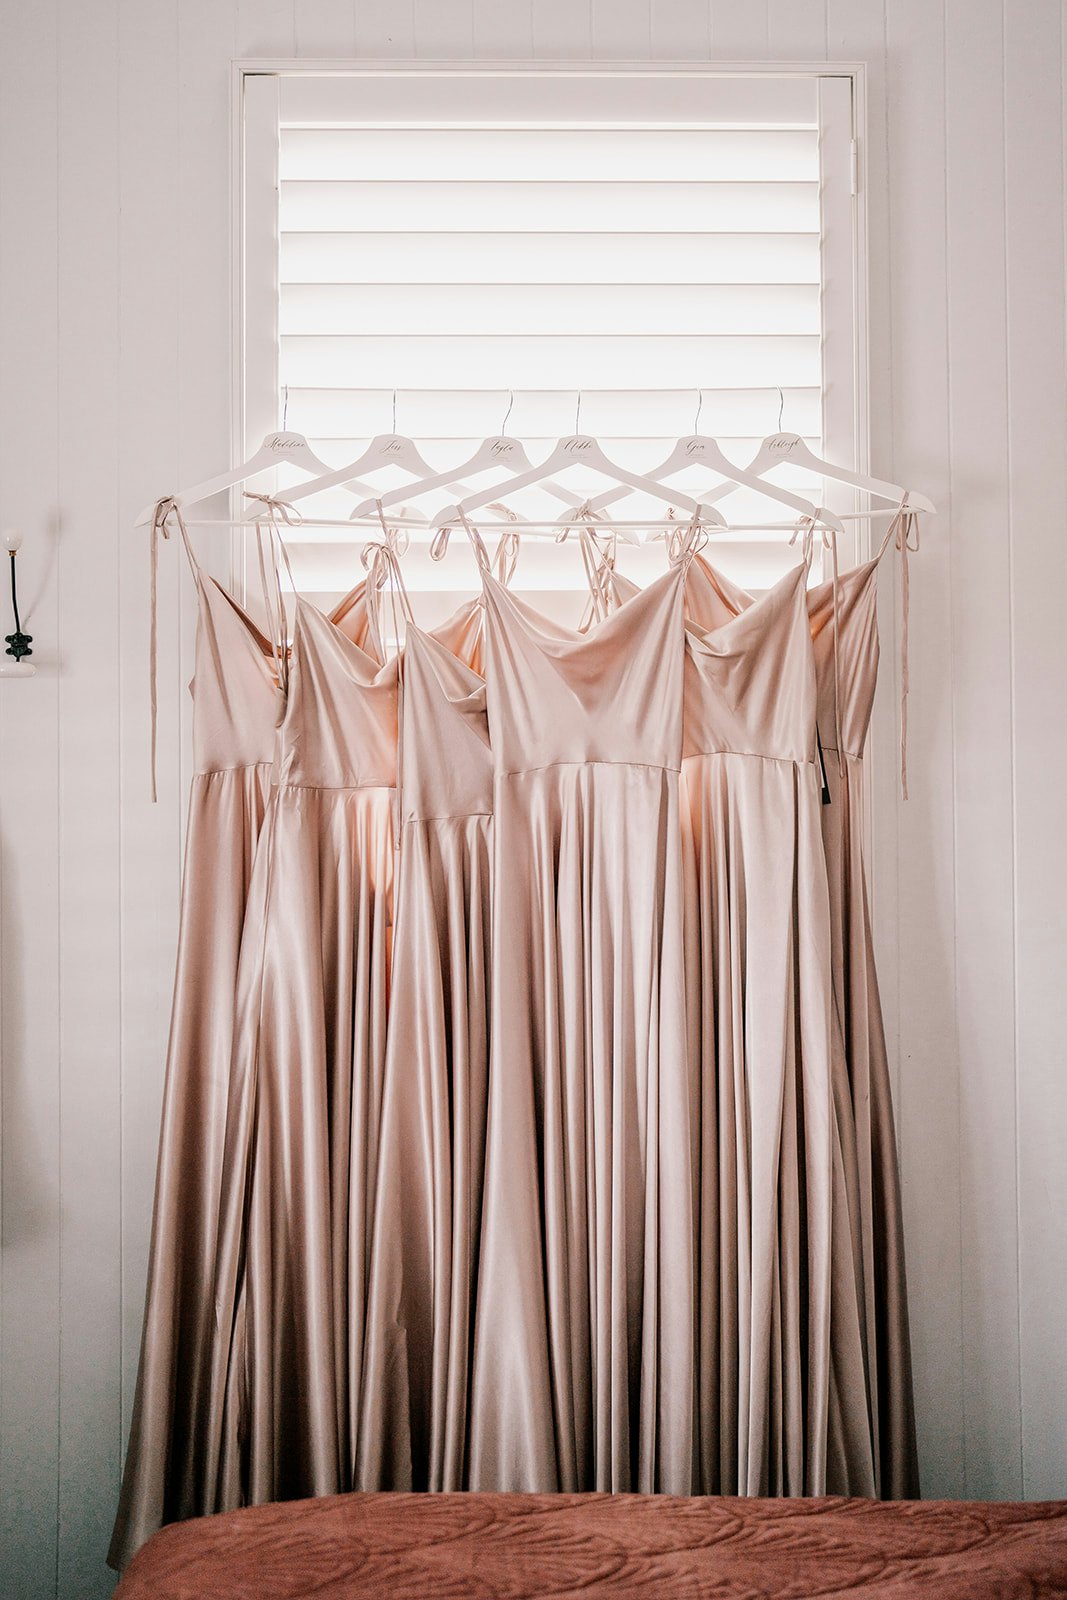 Bridesmaids dresses hanging from window